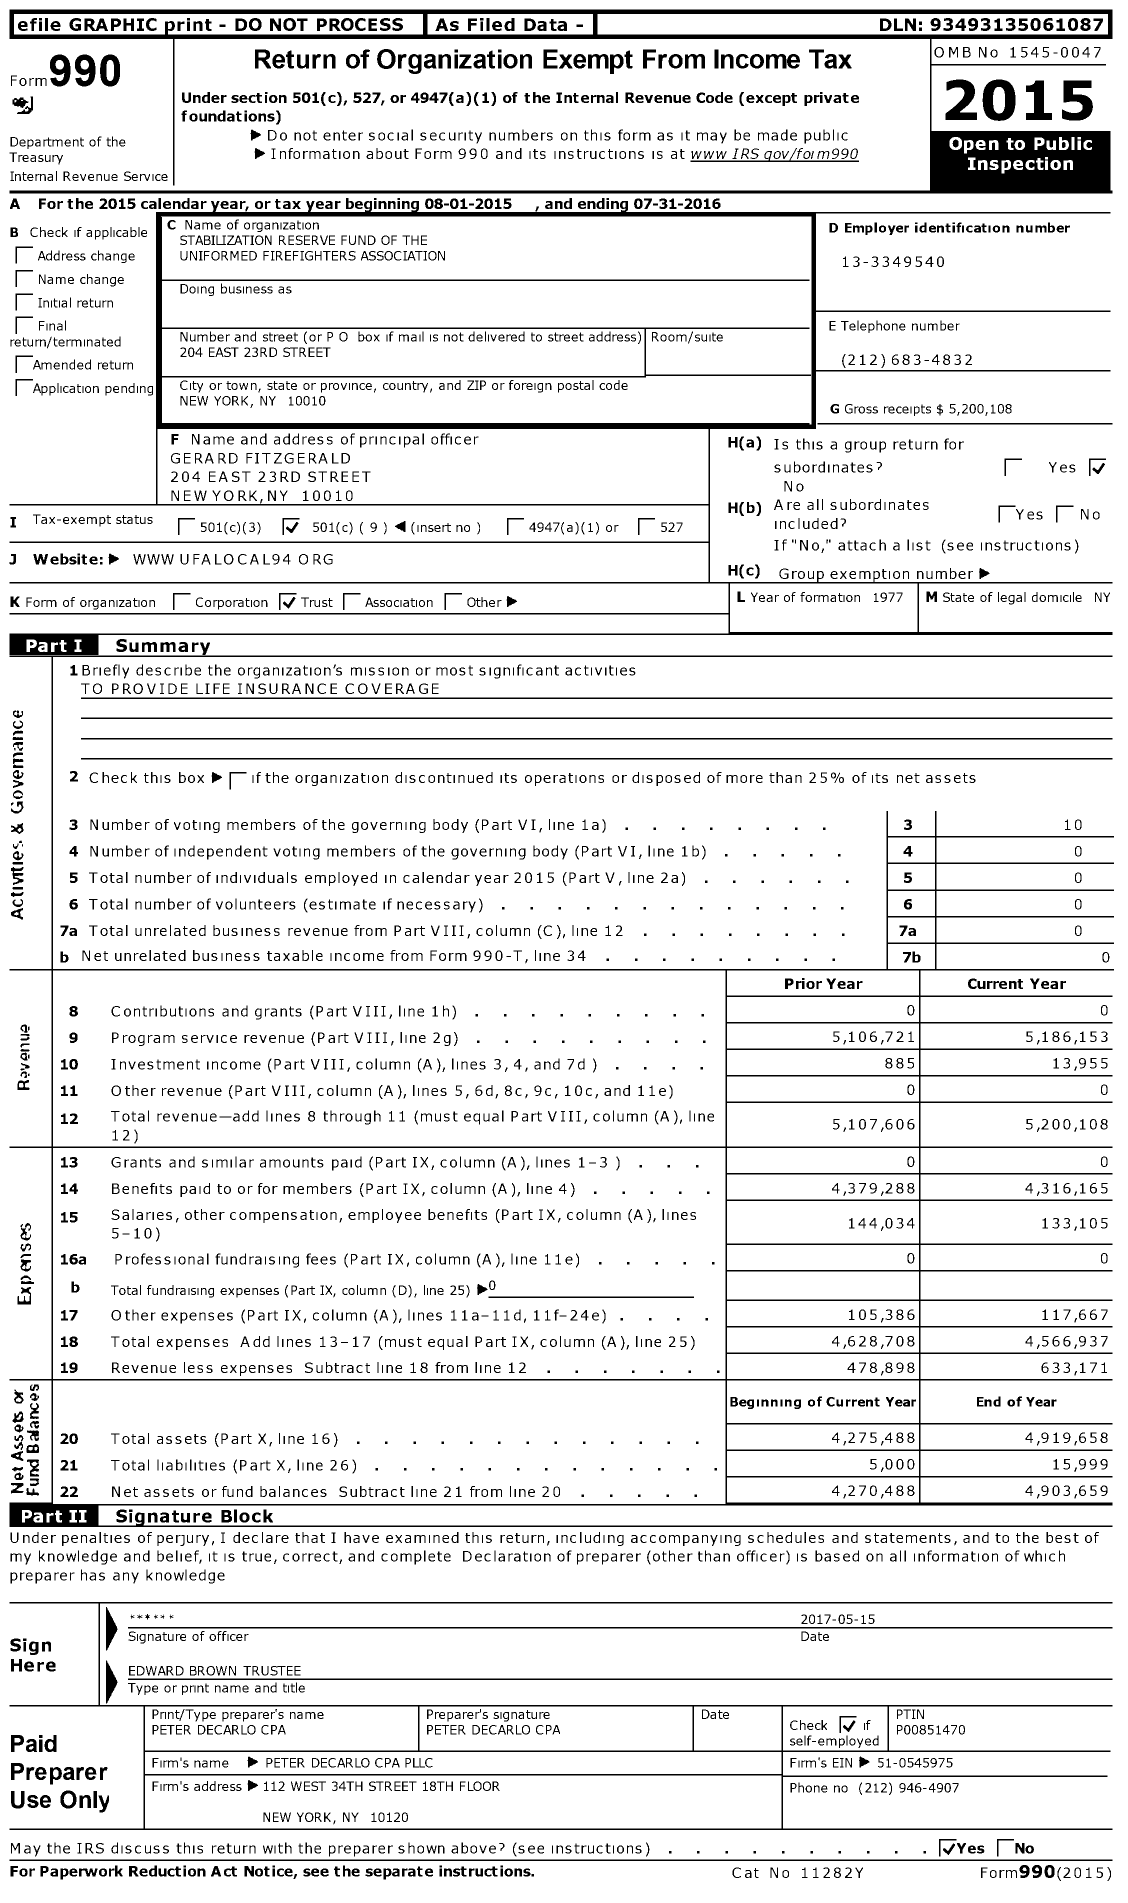 Image of first page of 2015 Form 990O for Stabilization Reserve Fund of the Uniformed Firefighters Association